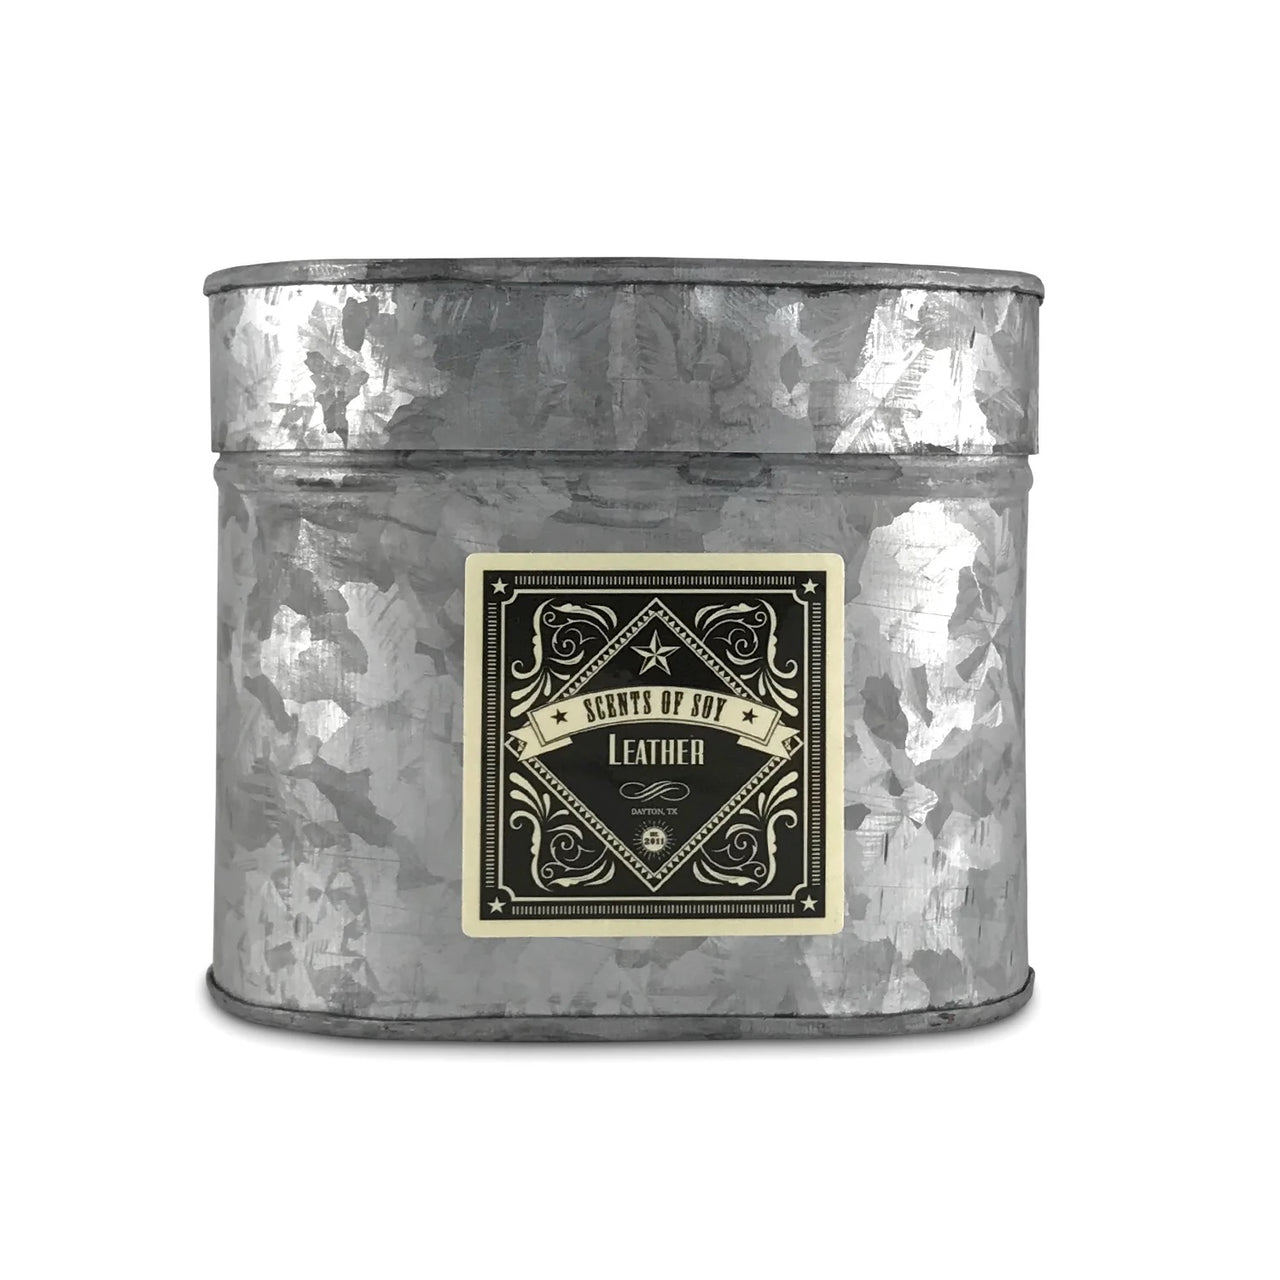 Leather Galvanized Oval Tin Soy Candle